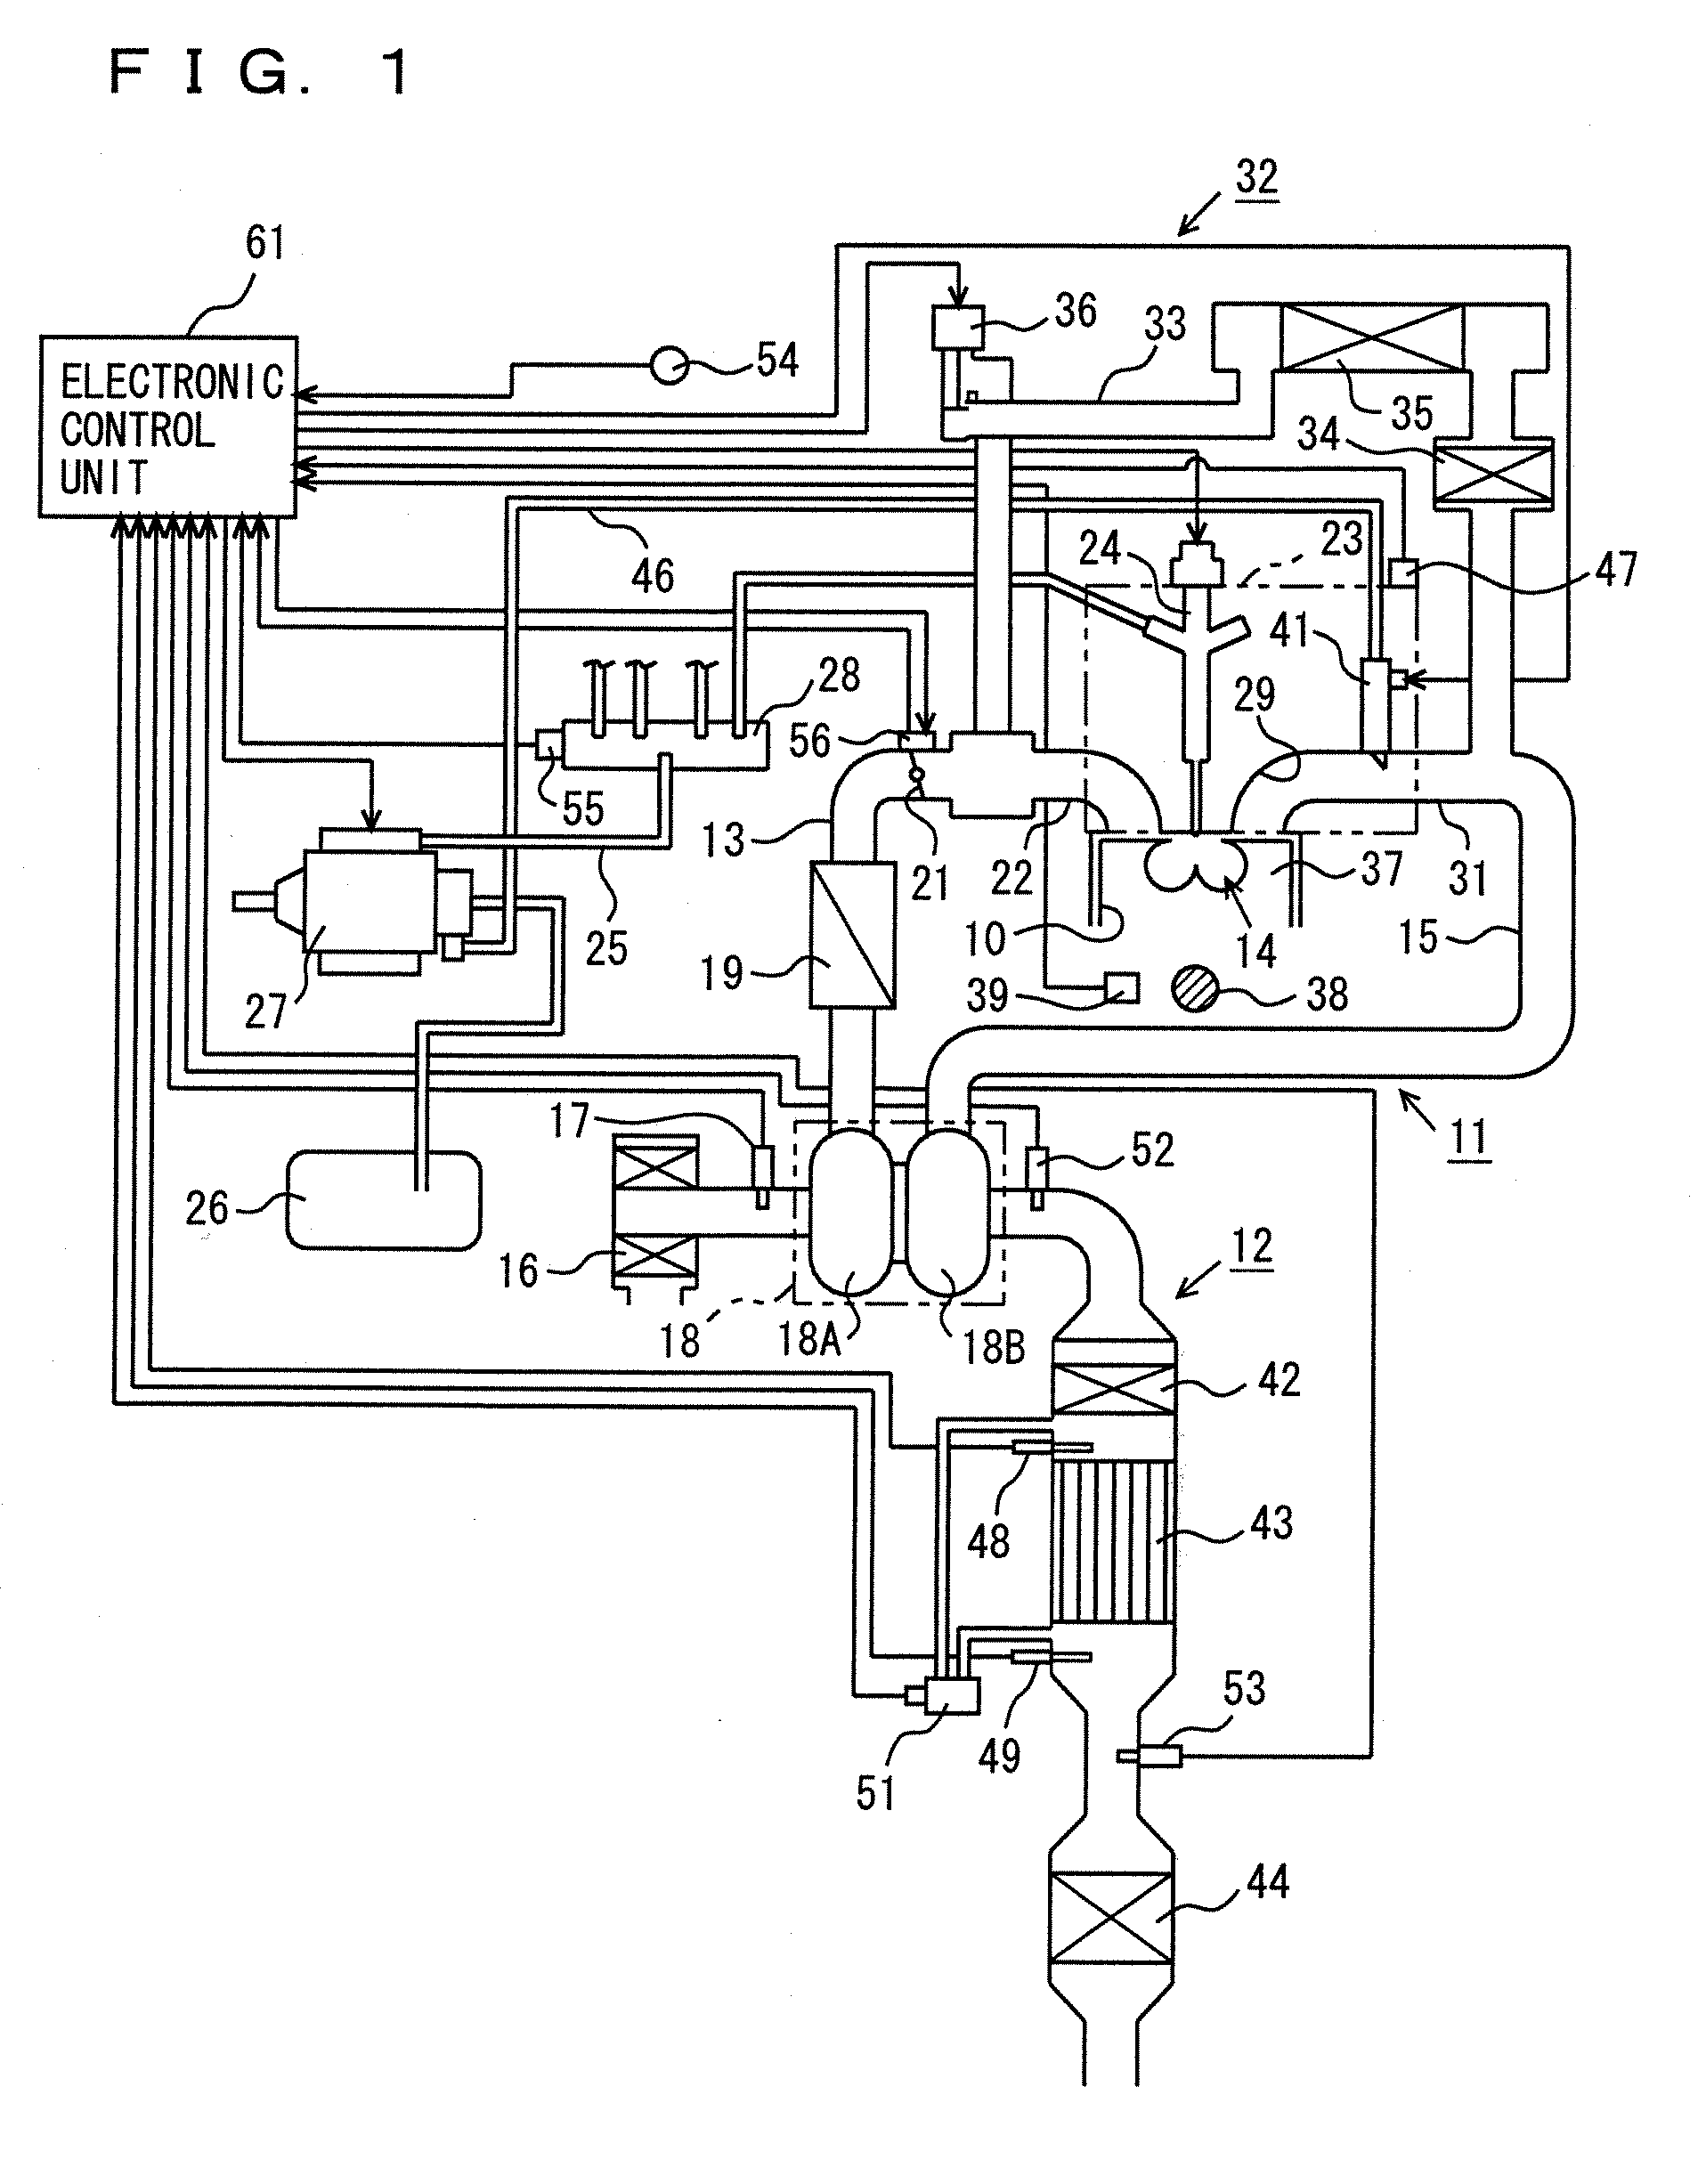 Exhaust Purifier for Internal Combustion Engine